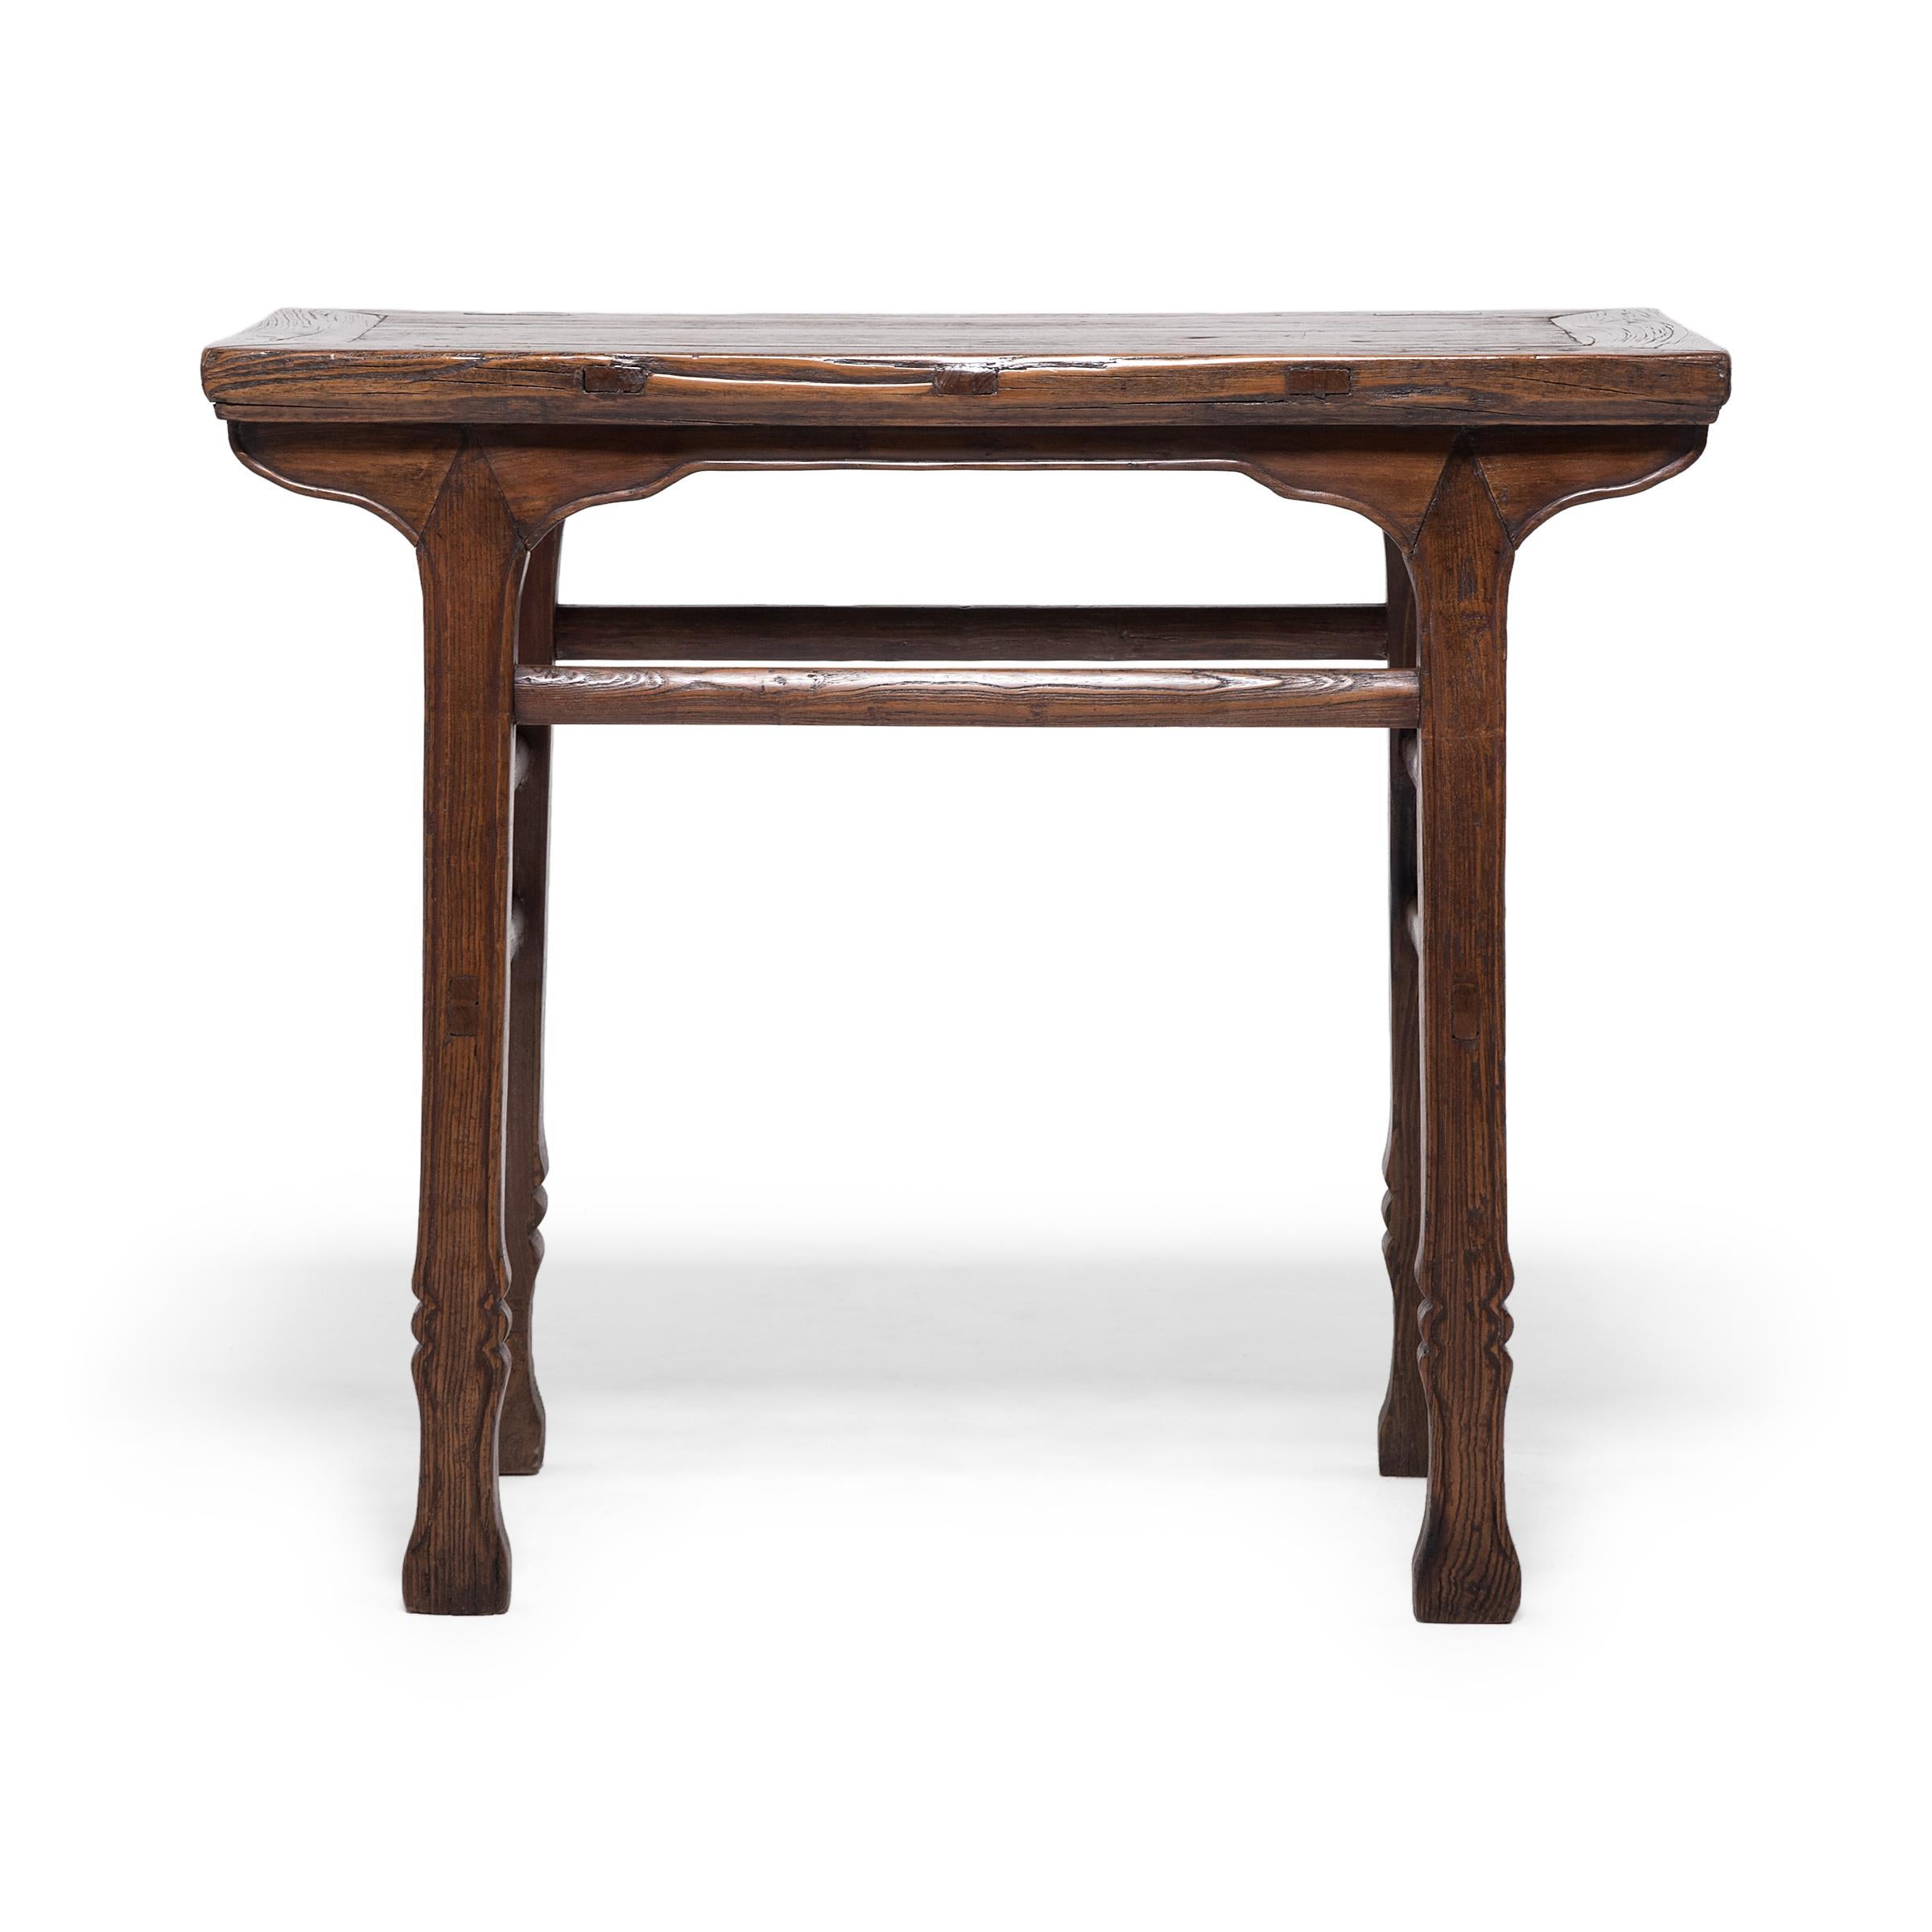 A tradition dating back to the Northern Song dynasty (960 to 1126), wine tables have been used for centuries at social gatherings as a spot to converse, sip wine, and make toasts. This 18th-century side table celebrates this time-honored tradition